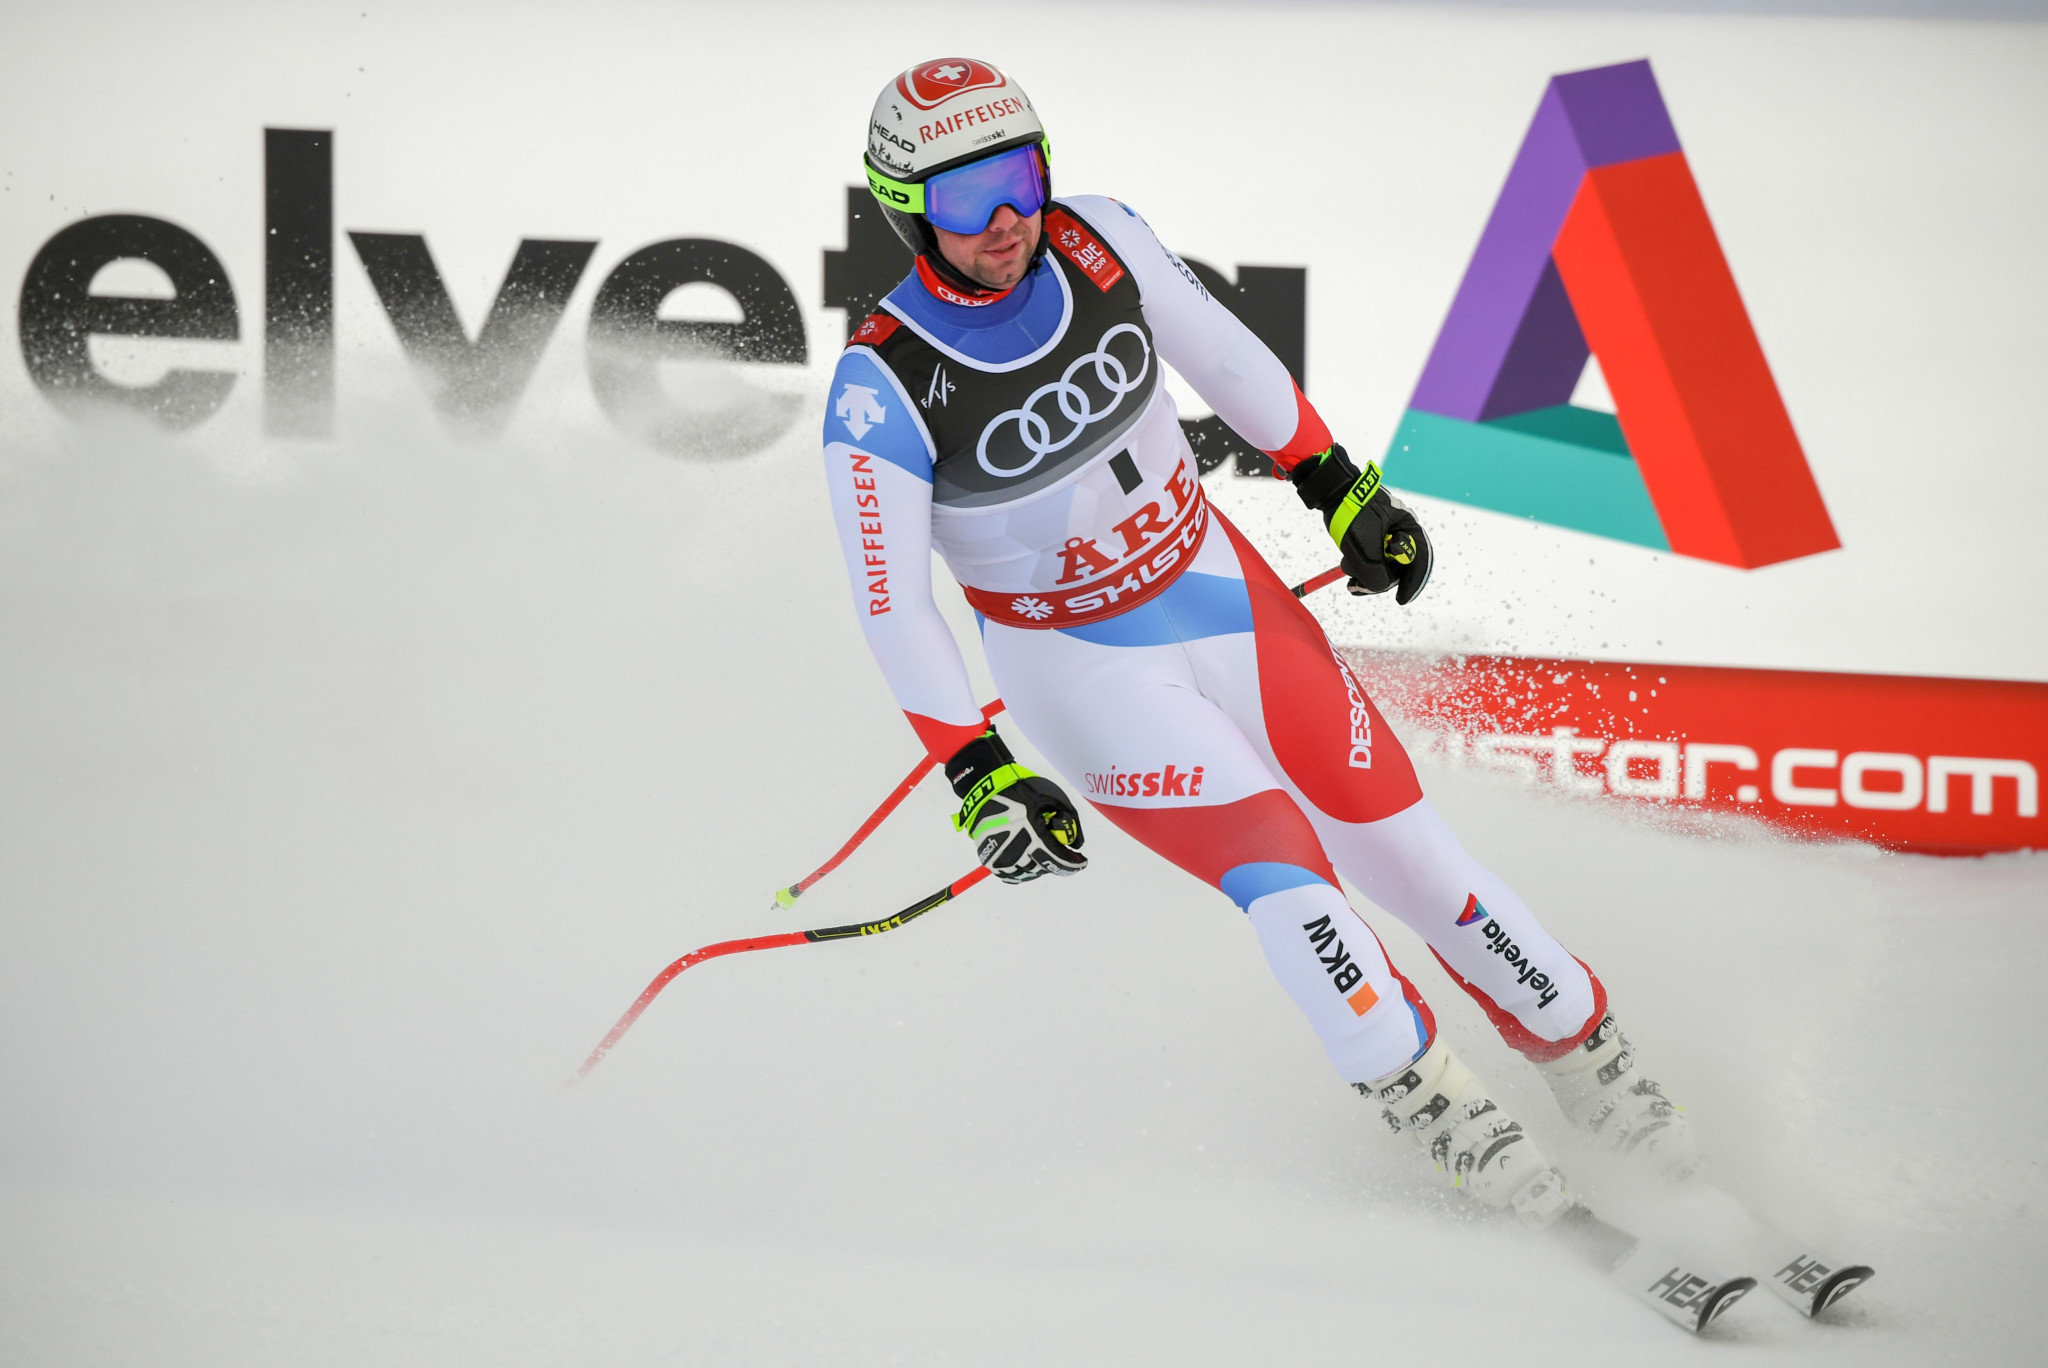 Amid poor visibility in the Swedish resort Switzerland's Beat Feuz went first and later joked that he could not see ©Getty Images